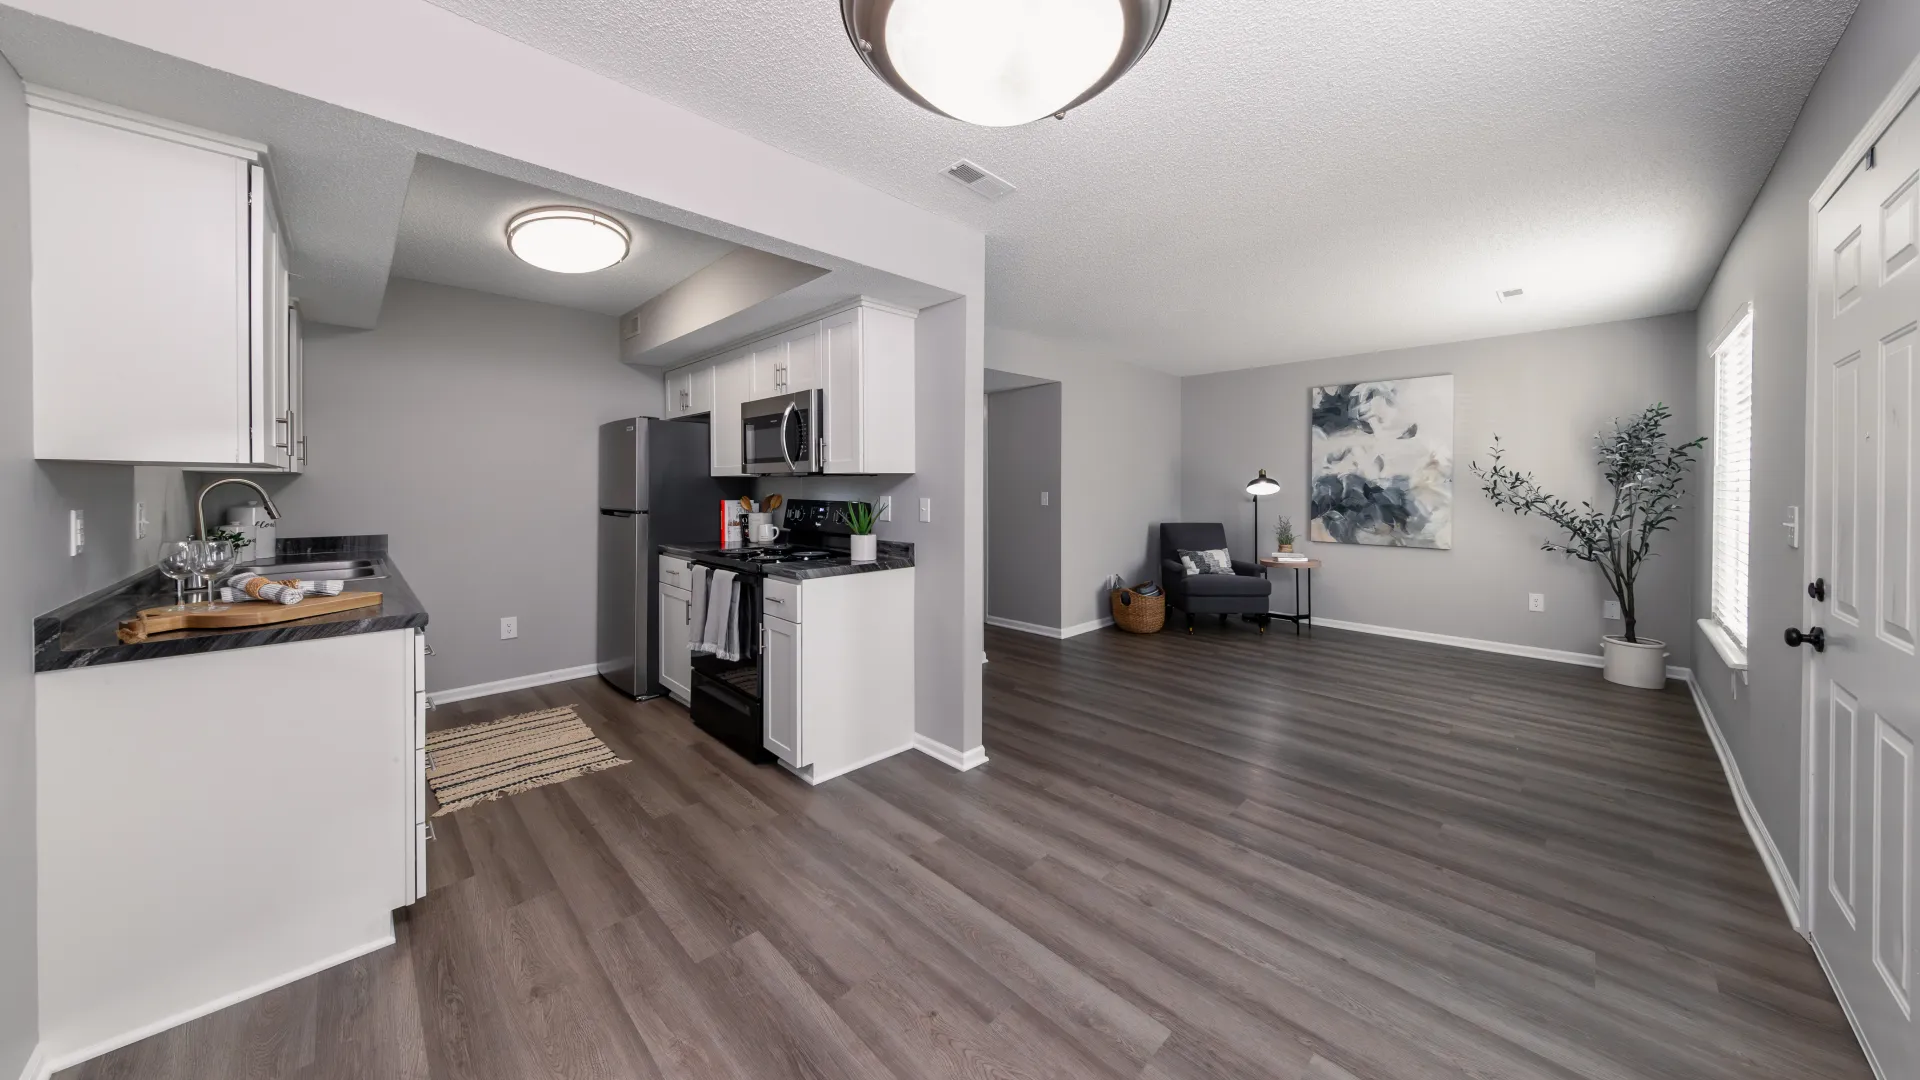 An open-concept living area featuring a modern kitchen with stainless steel appliances and a spacious living room with hardwood floors and stylish decor.